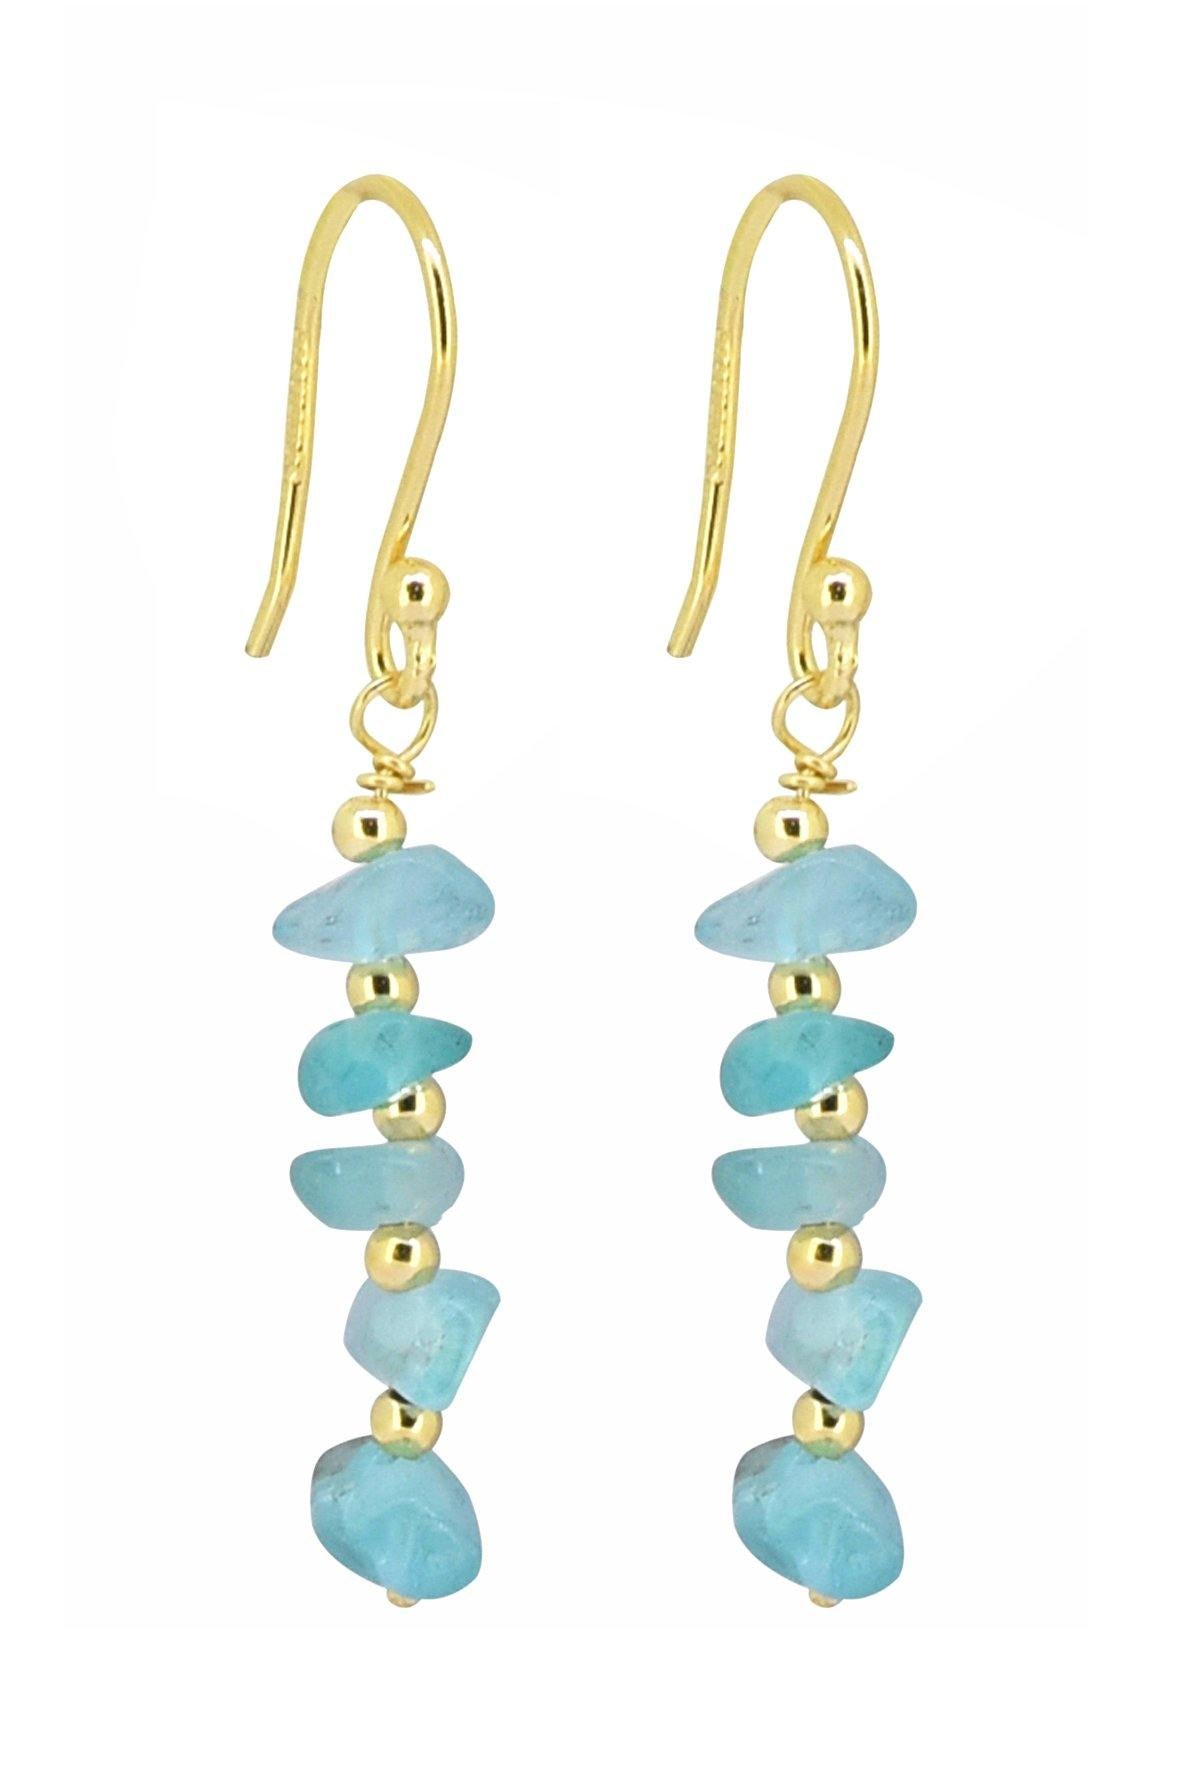 Apatite Solid 925 Silver Gold Plated Dangle Earrings Jewelry - YoTreasure